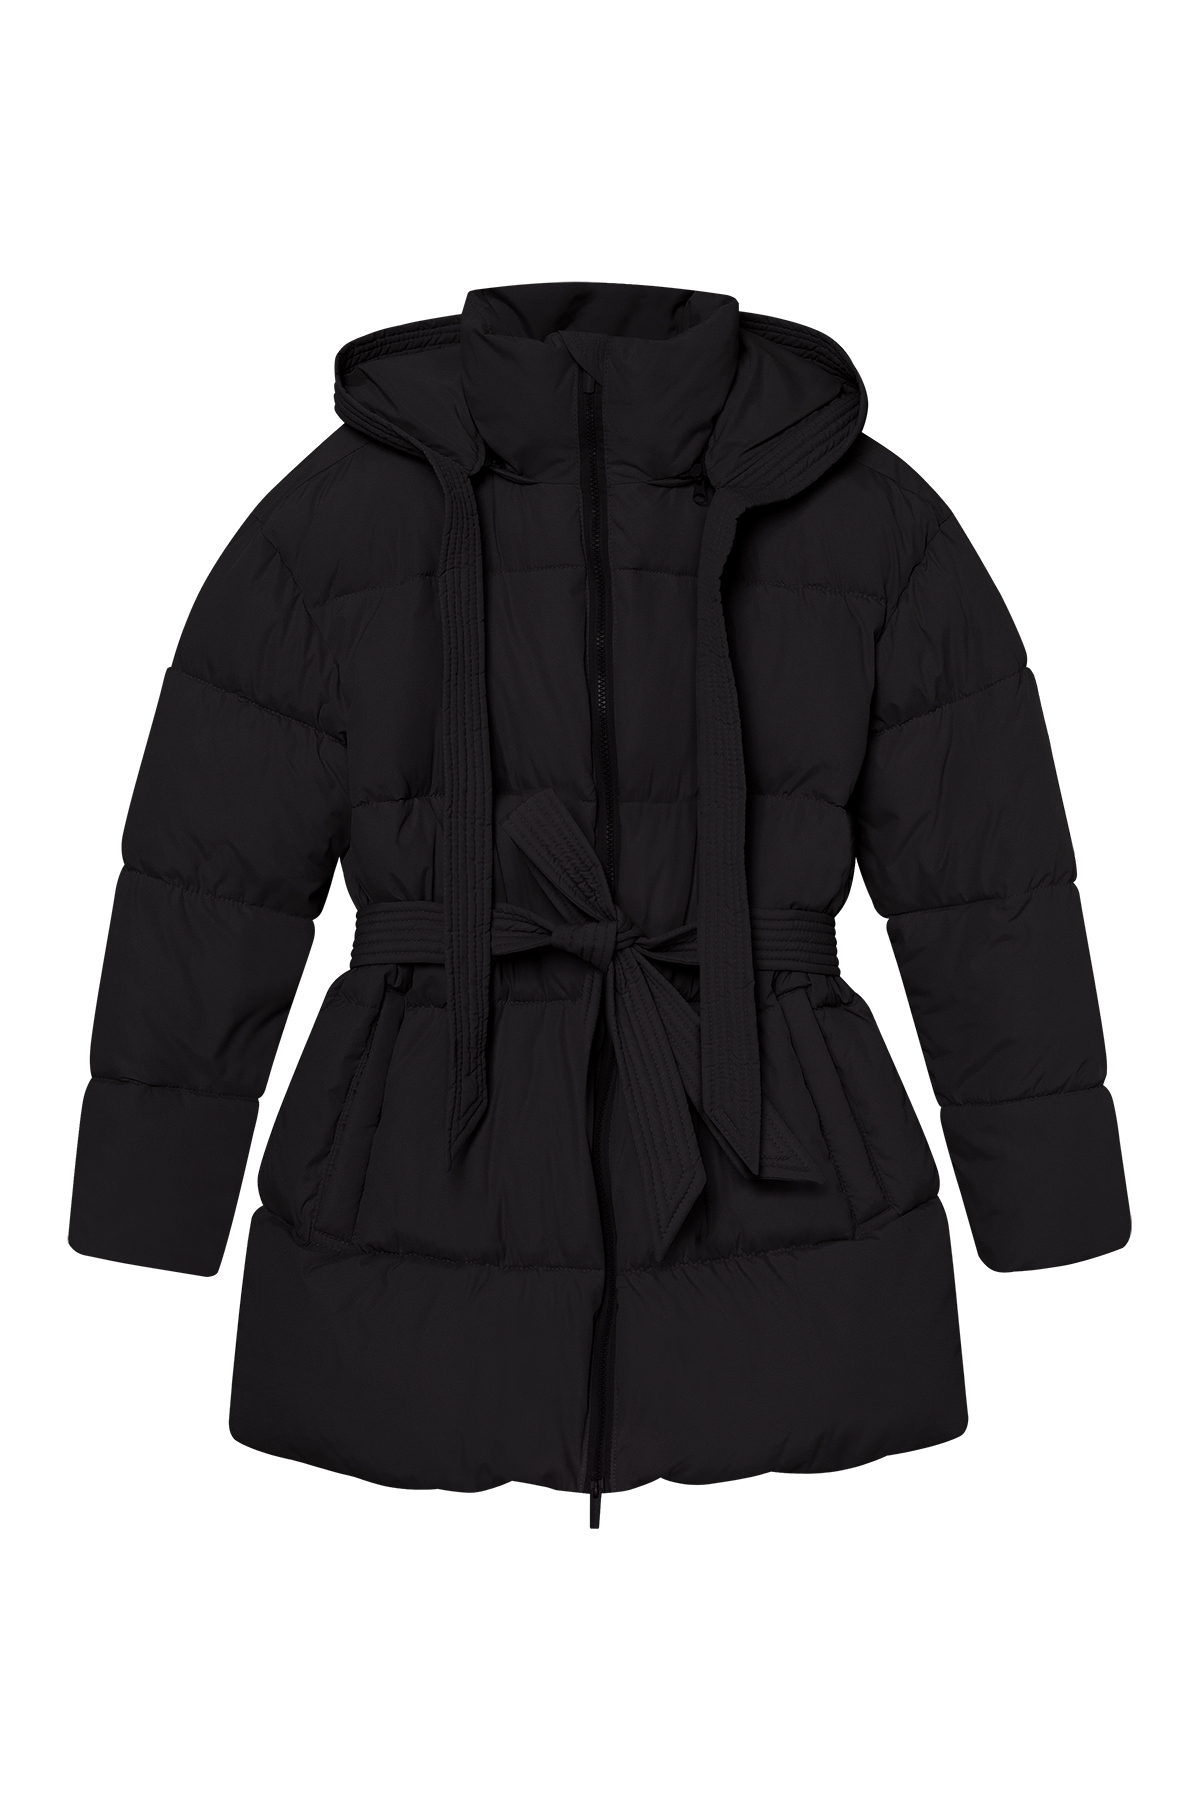 Black quilted jacket with a detachable hood, photo 7